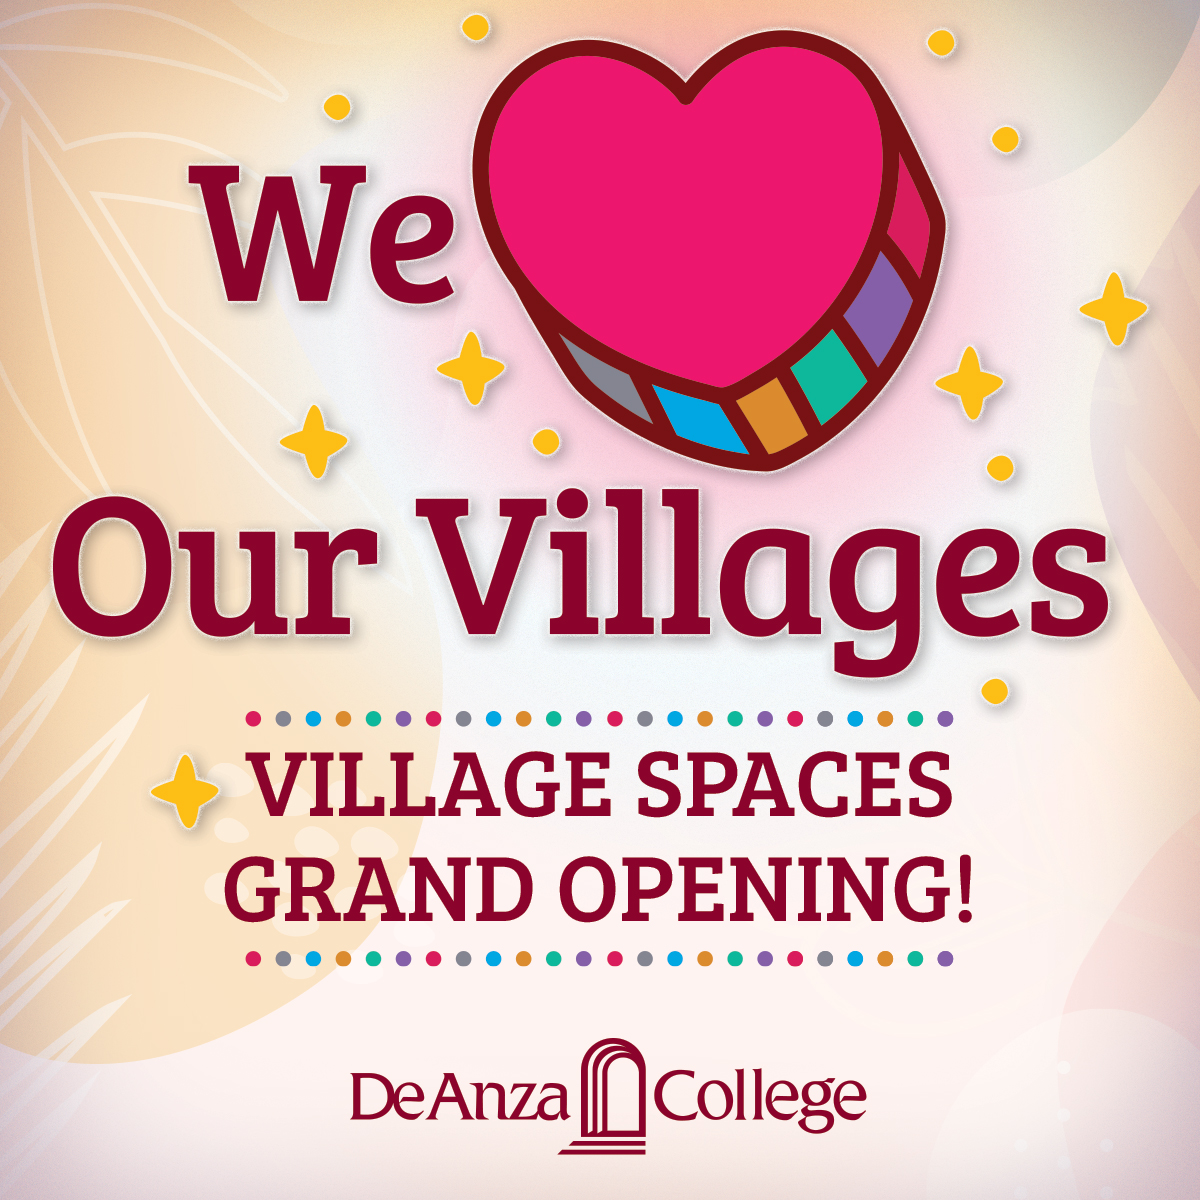 We love our village spaces